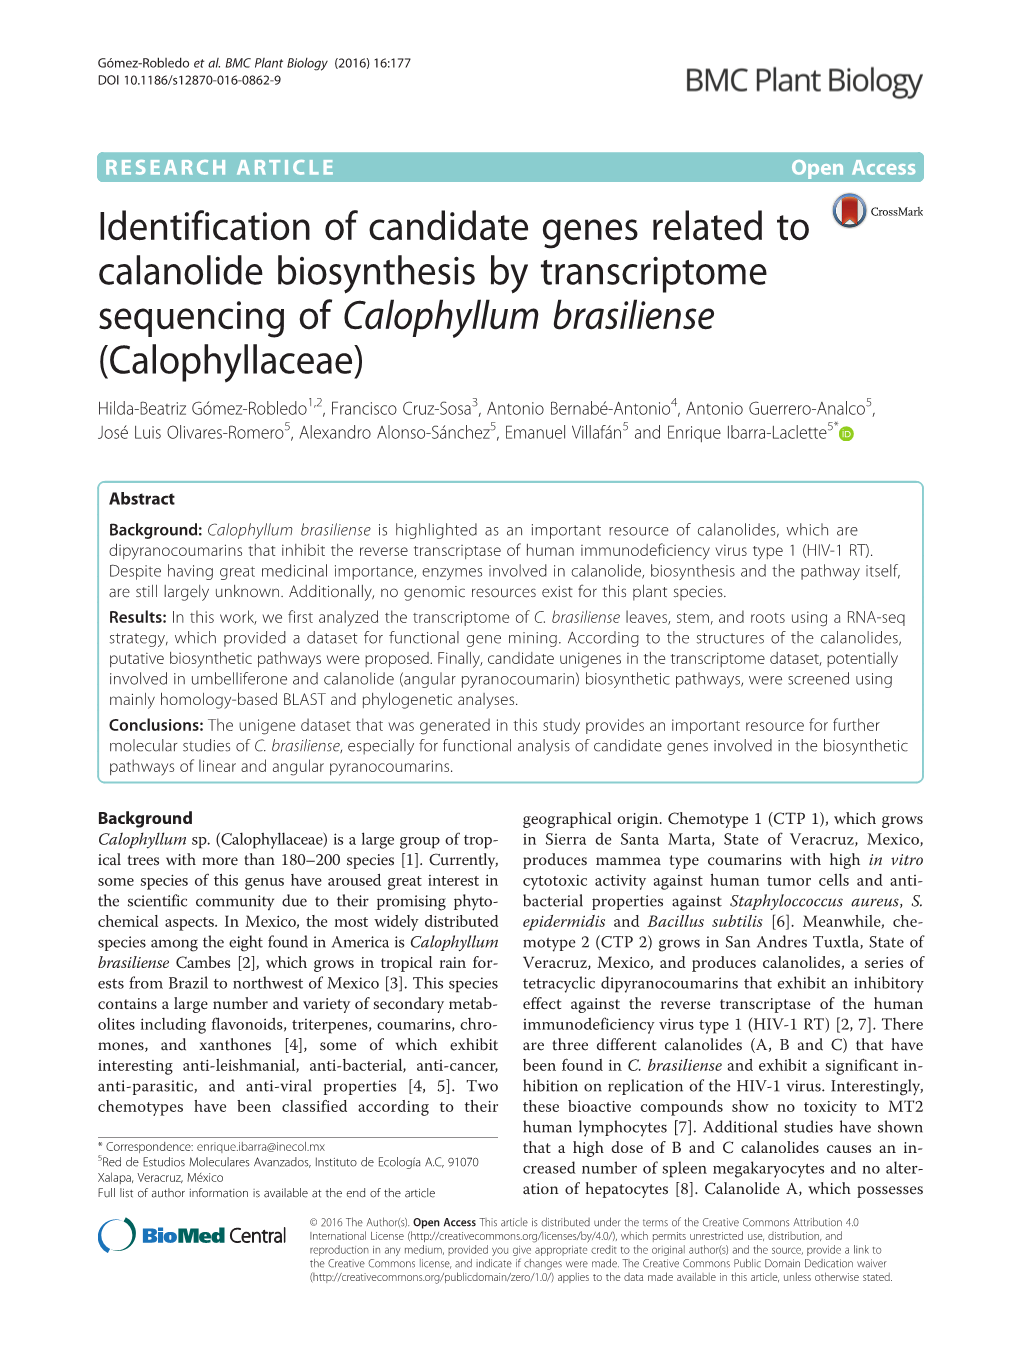 Identification of Candidate Genes Related to Calanolide Biosynthesis